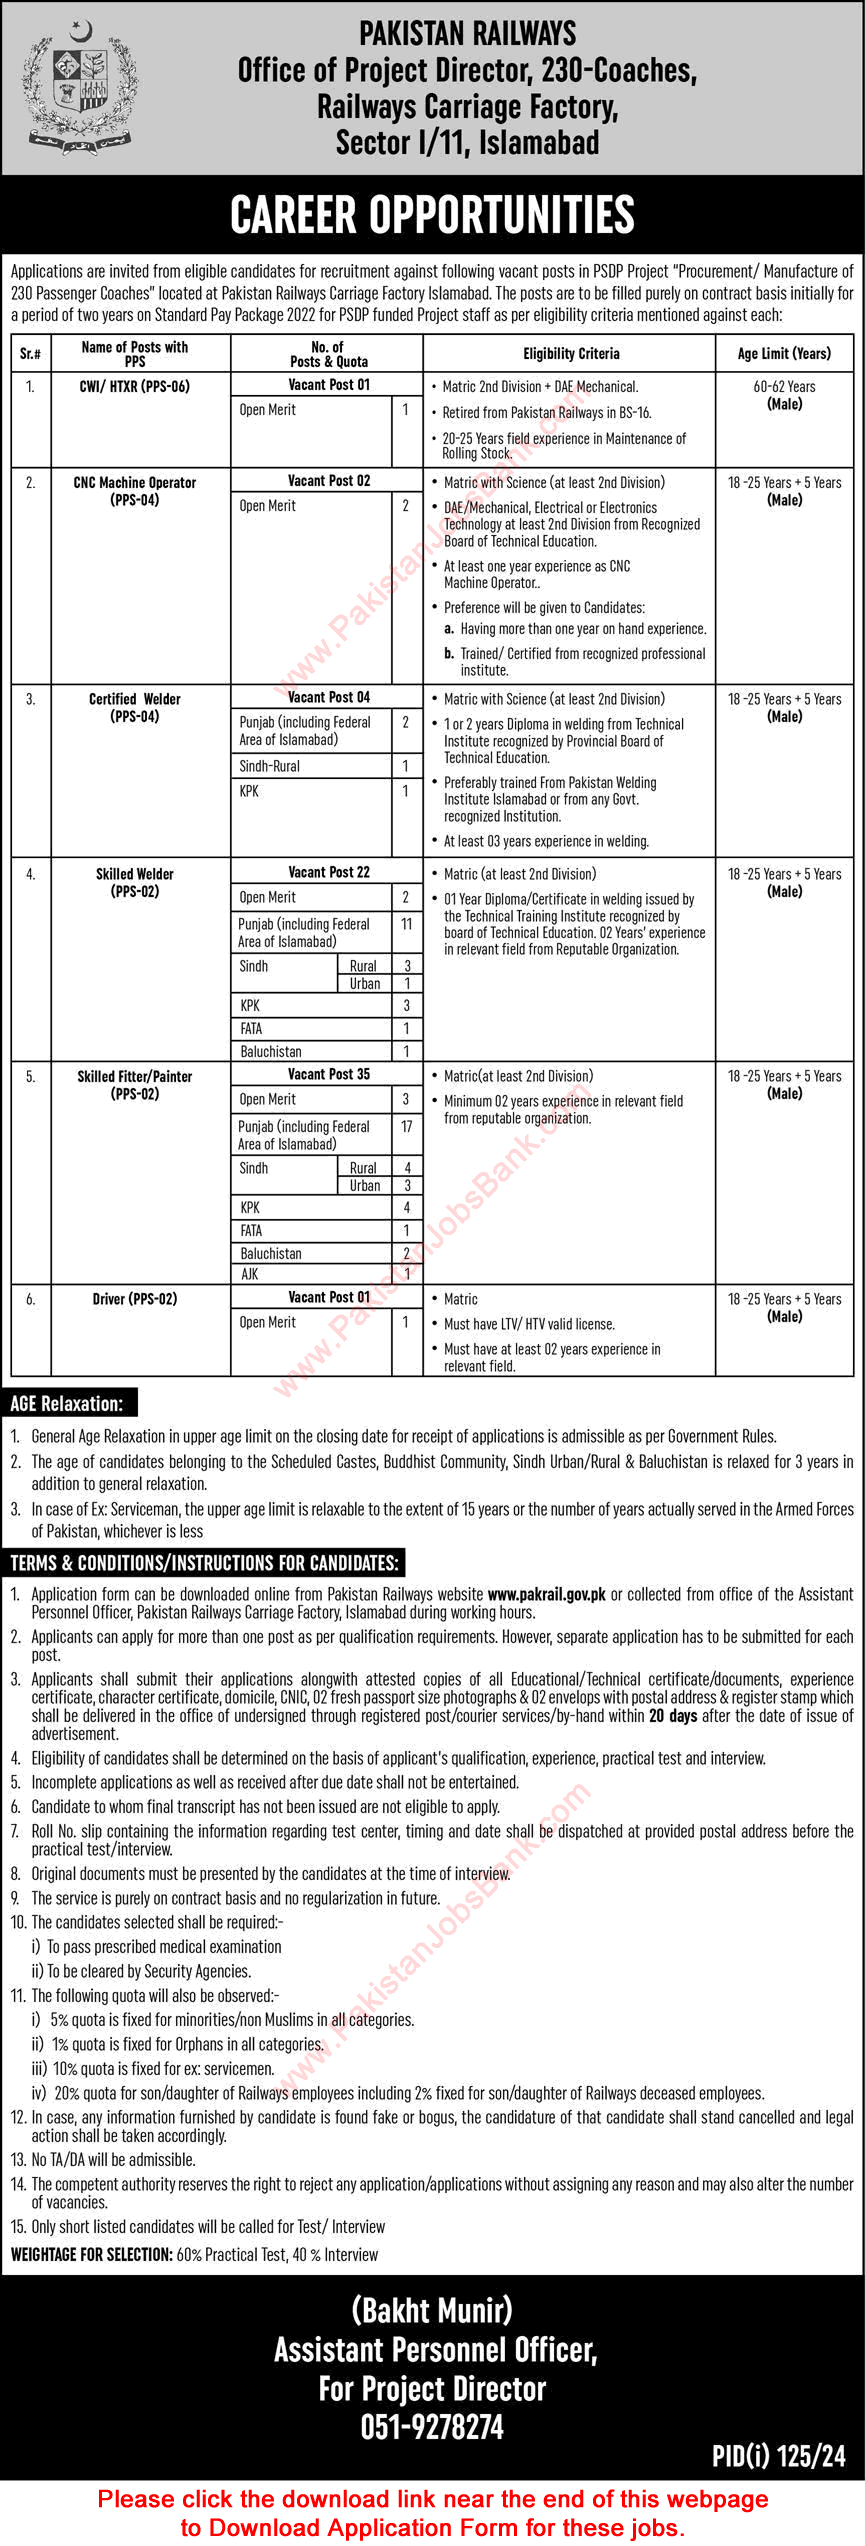 Pakistan Railways Jobs July 2024 Application Form Welders, Fitters / Painters & Others Carriage Factory Latest